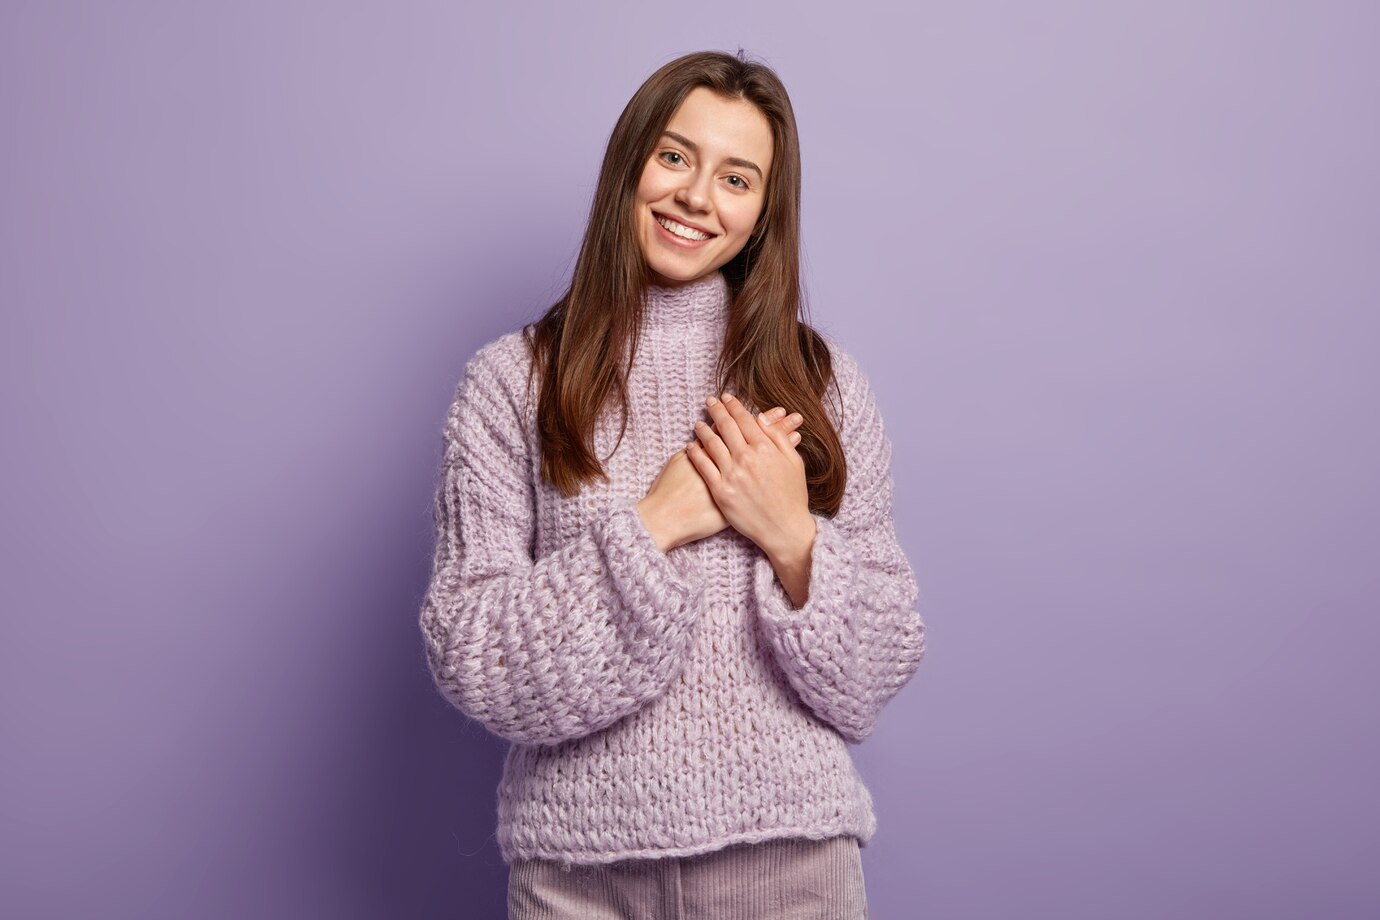 portrait-happy-young-european-woman-keeps-hands-breast-shows-heart-gesture-expresses-gratitude-being-thankful-models-against-purple-wall-body-language-monochrome-people-devotion_273609-26597